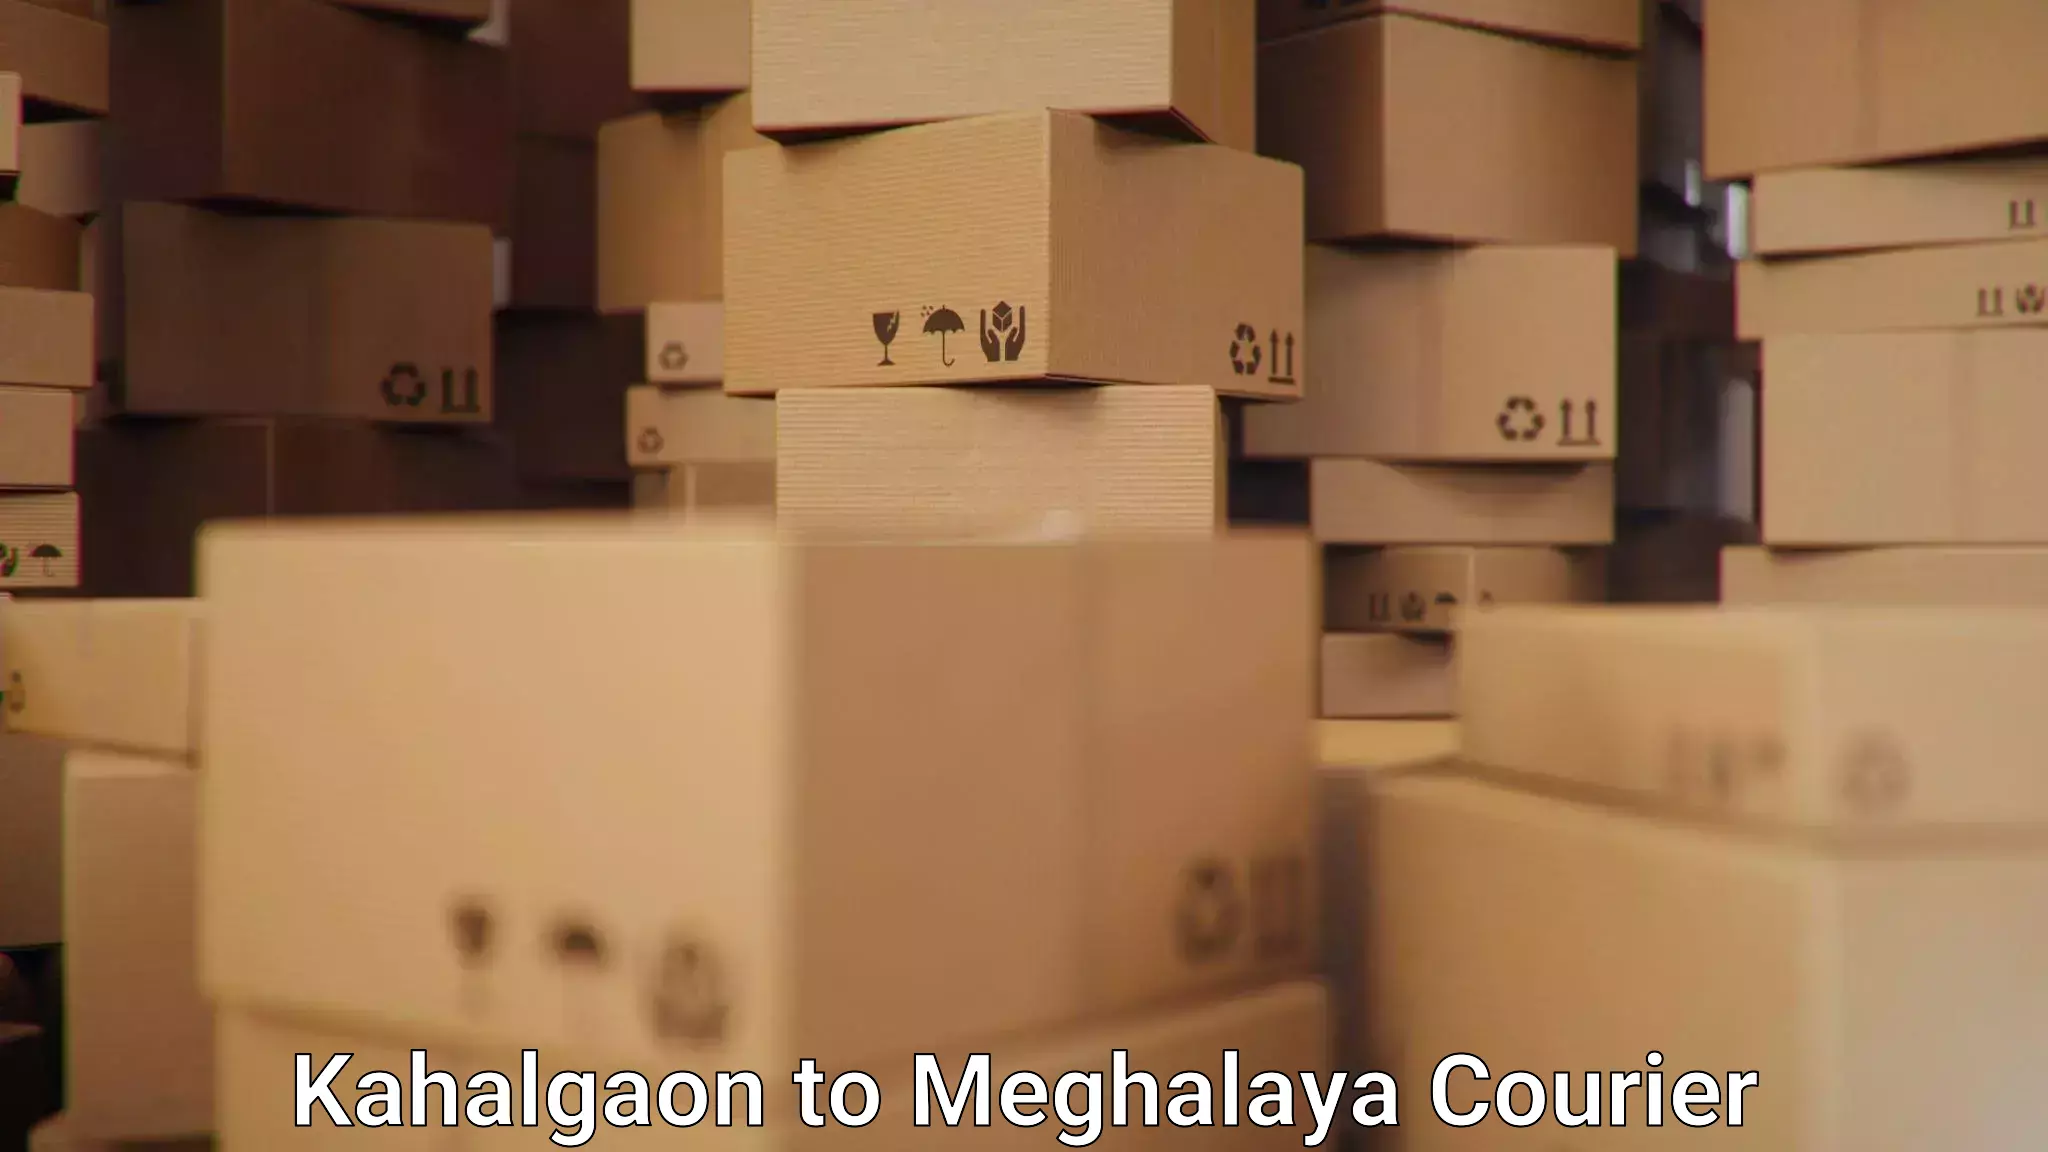 24-hour courier service Kahalgaon to Shillong